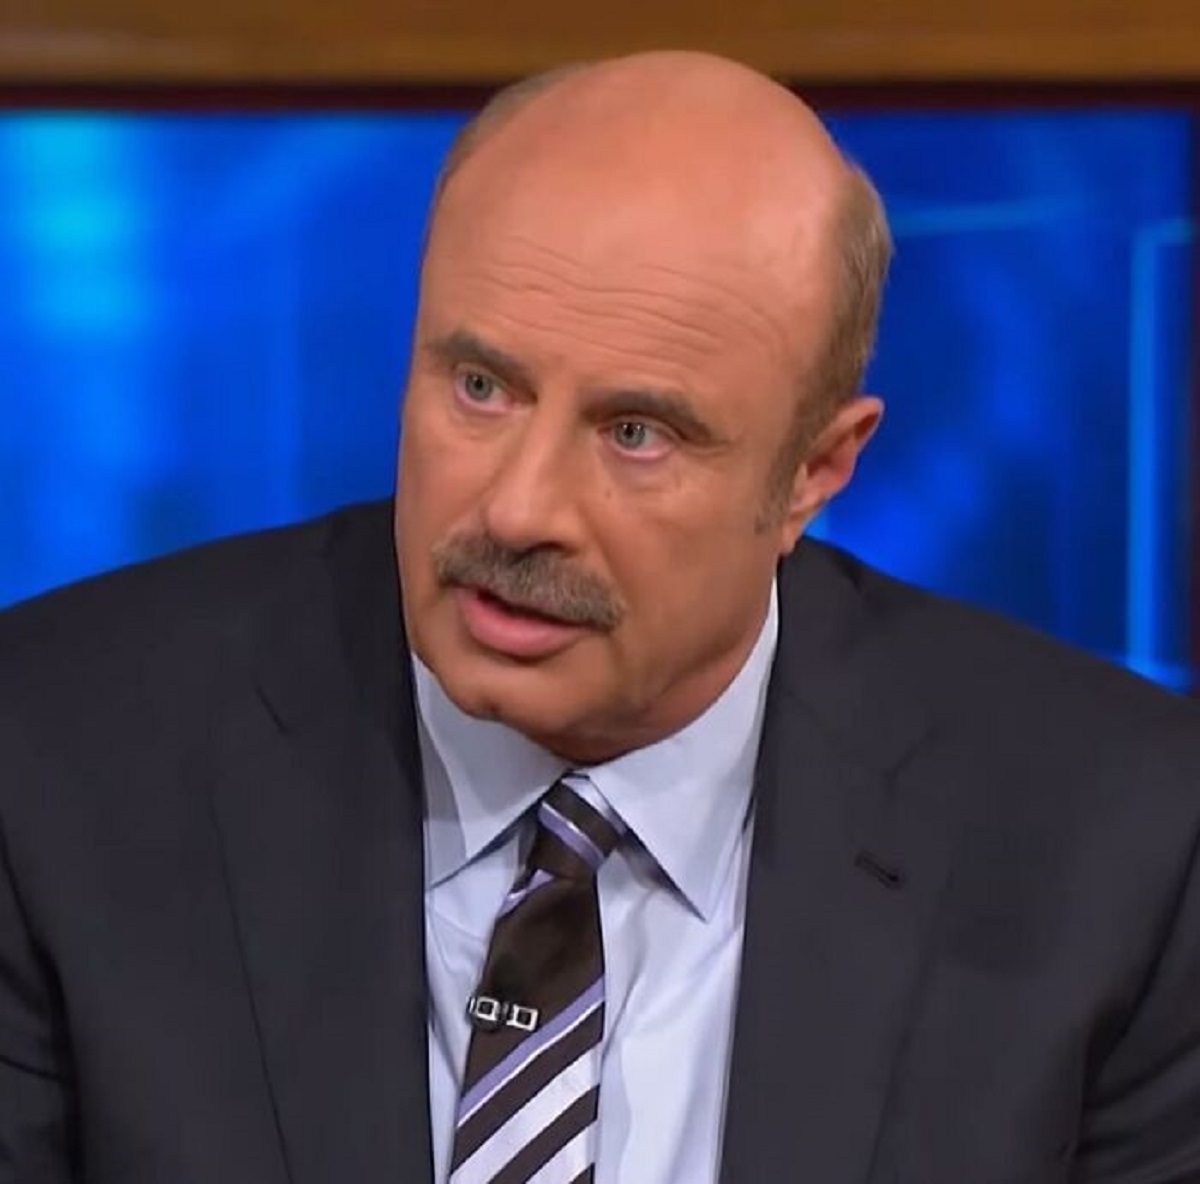 I'm glad Doctor Phil is finally getting his comeuppance. He's said and done terrible things to people who needed real help for the sake of viewership and acts like he cares so much. Well it's obvious he doesn't.